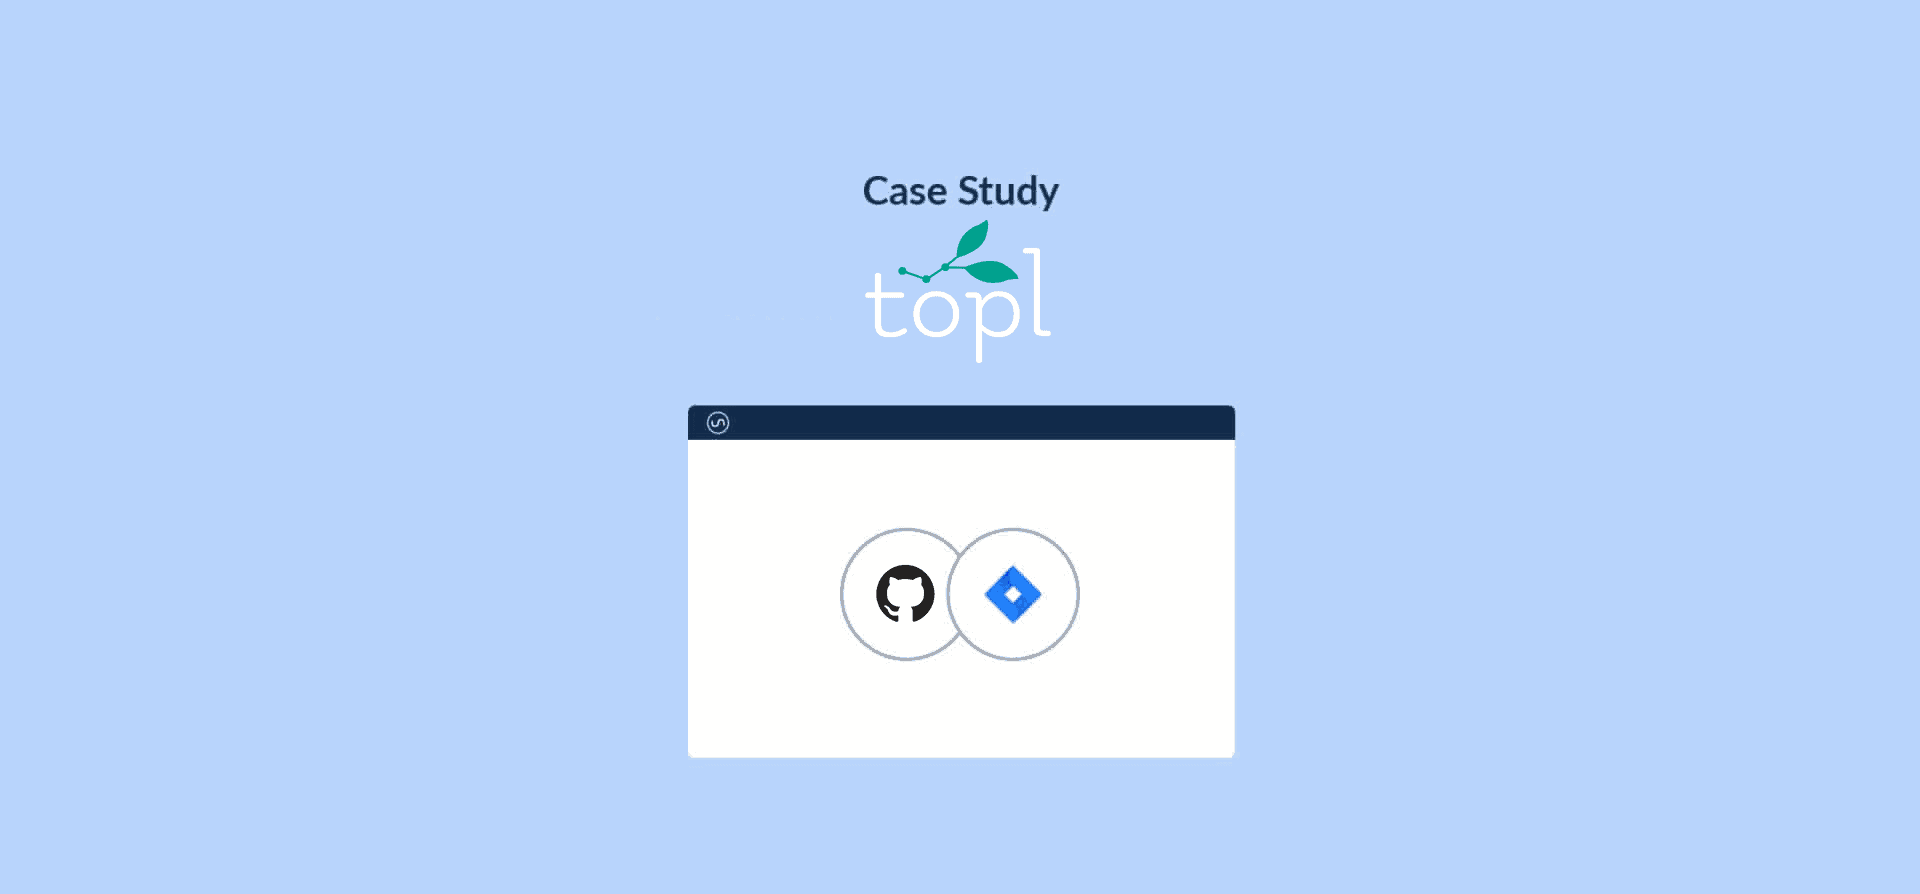 Logos for Topl, GitHub, and Jira, representing the Topl case study